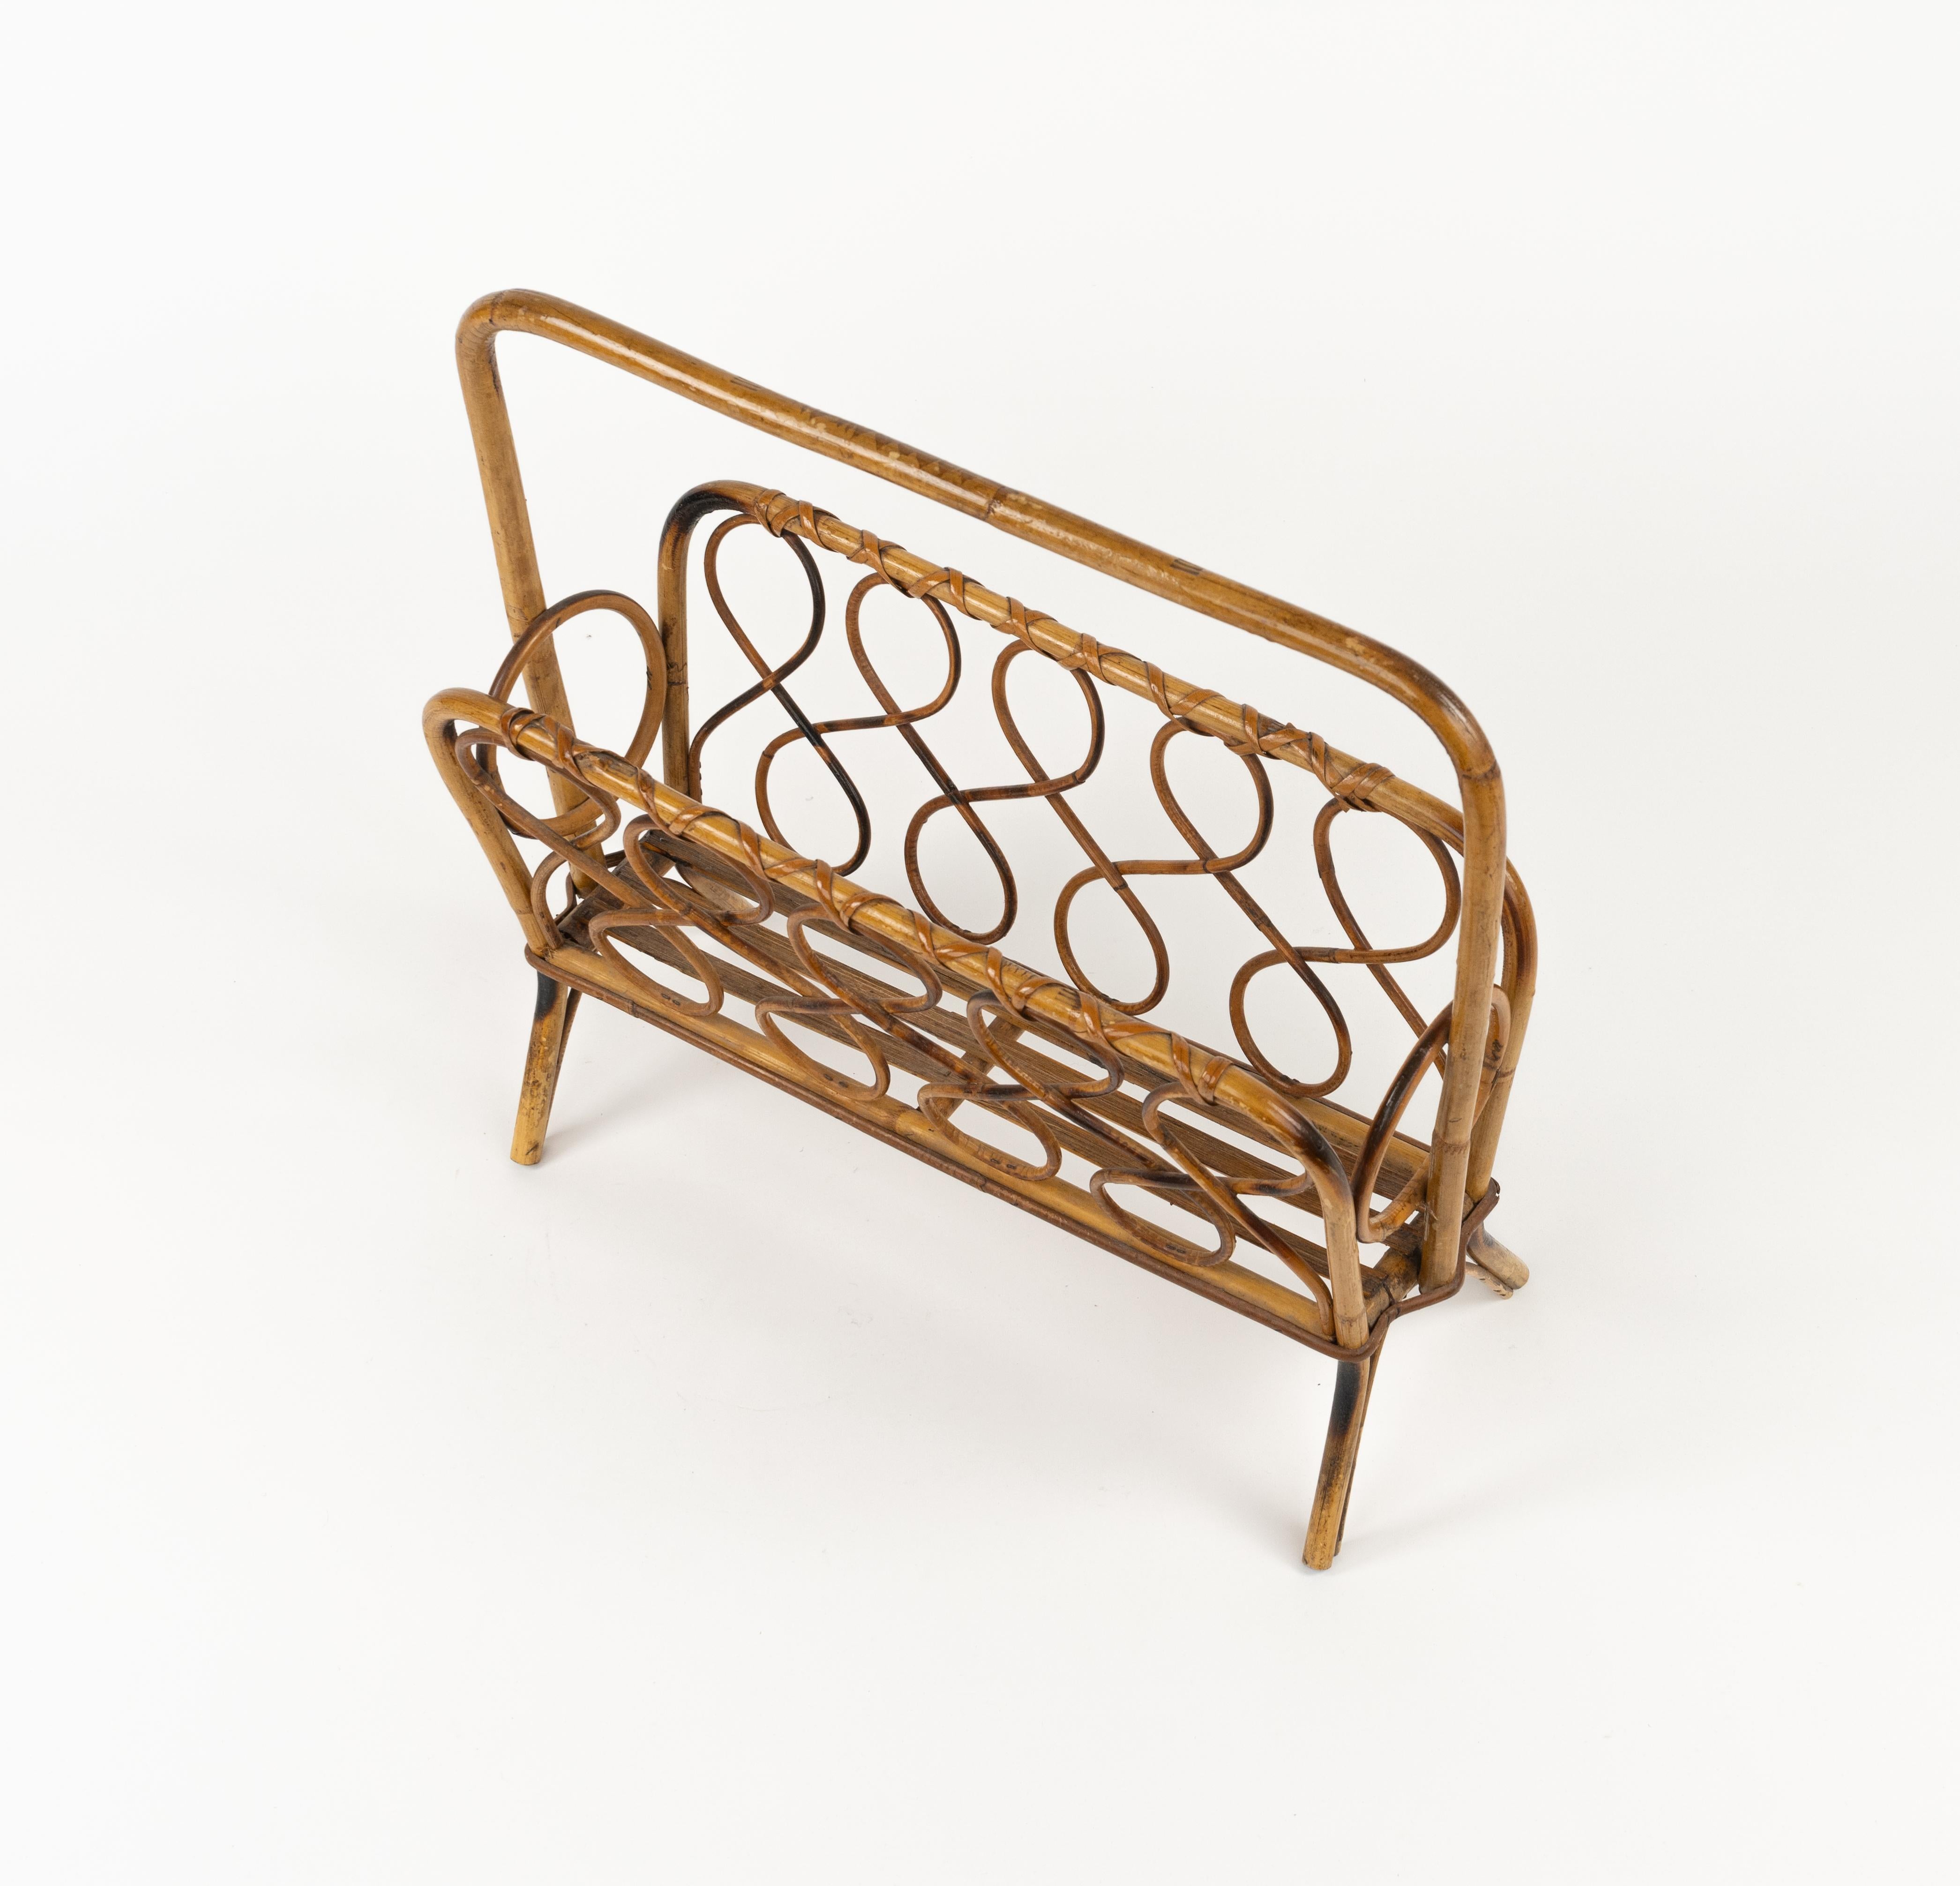 Midcentury Rattan and Bamboo Magazine Rack, Italy 1960s For Sale 3